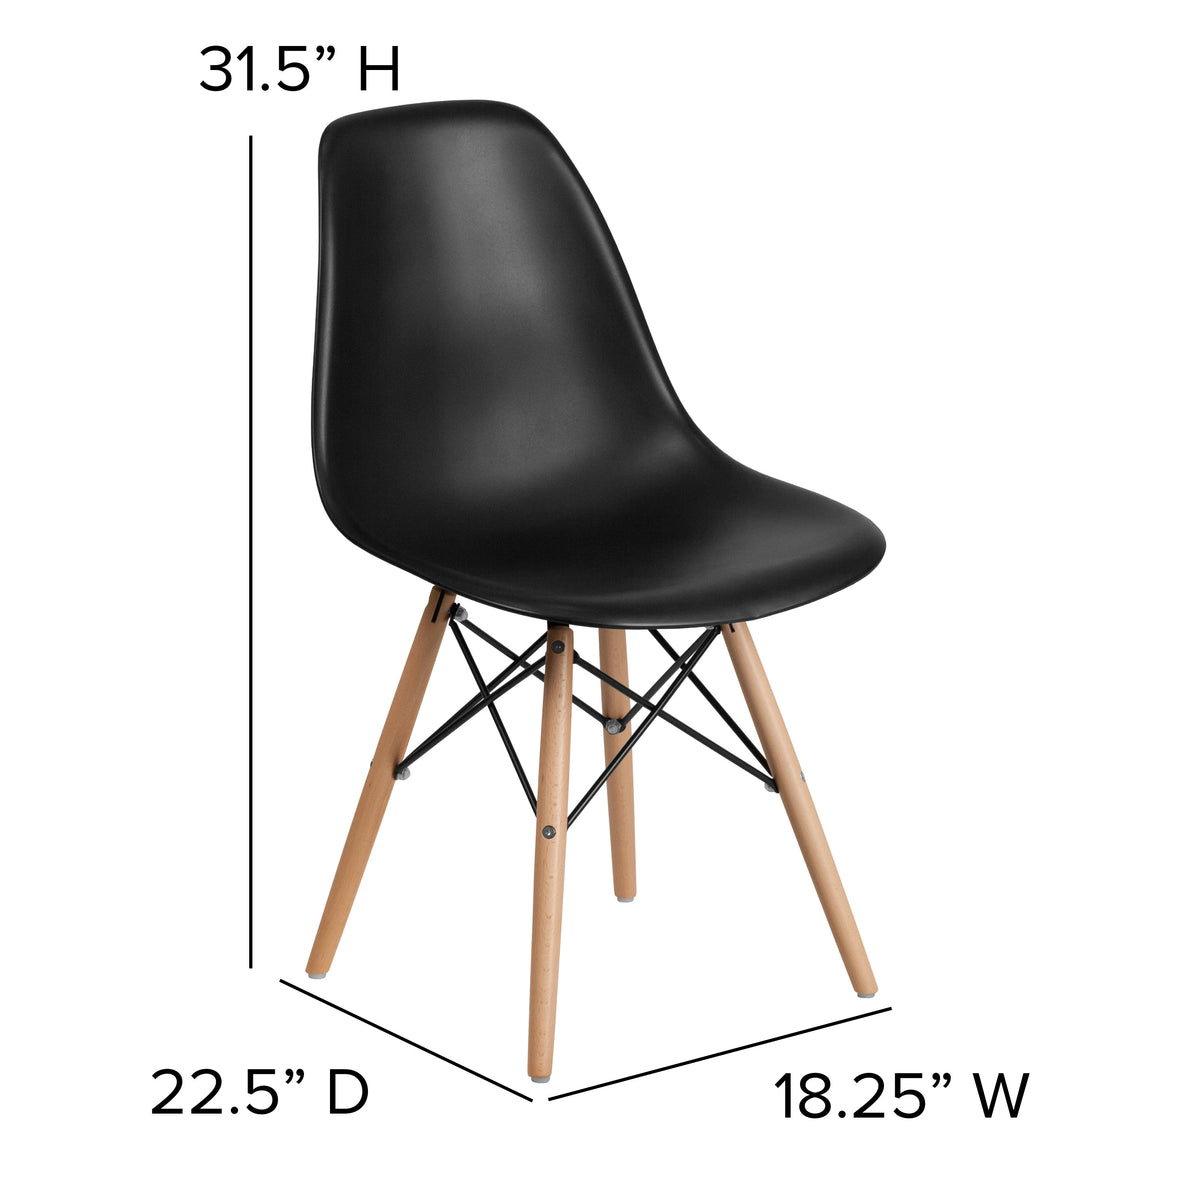 Black |#| Black Plastic Chair with Wooden Legs - Hospitality Seating - Side Chair